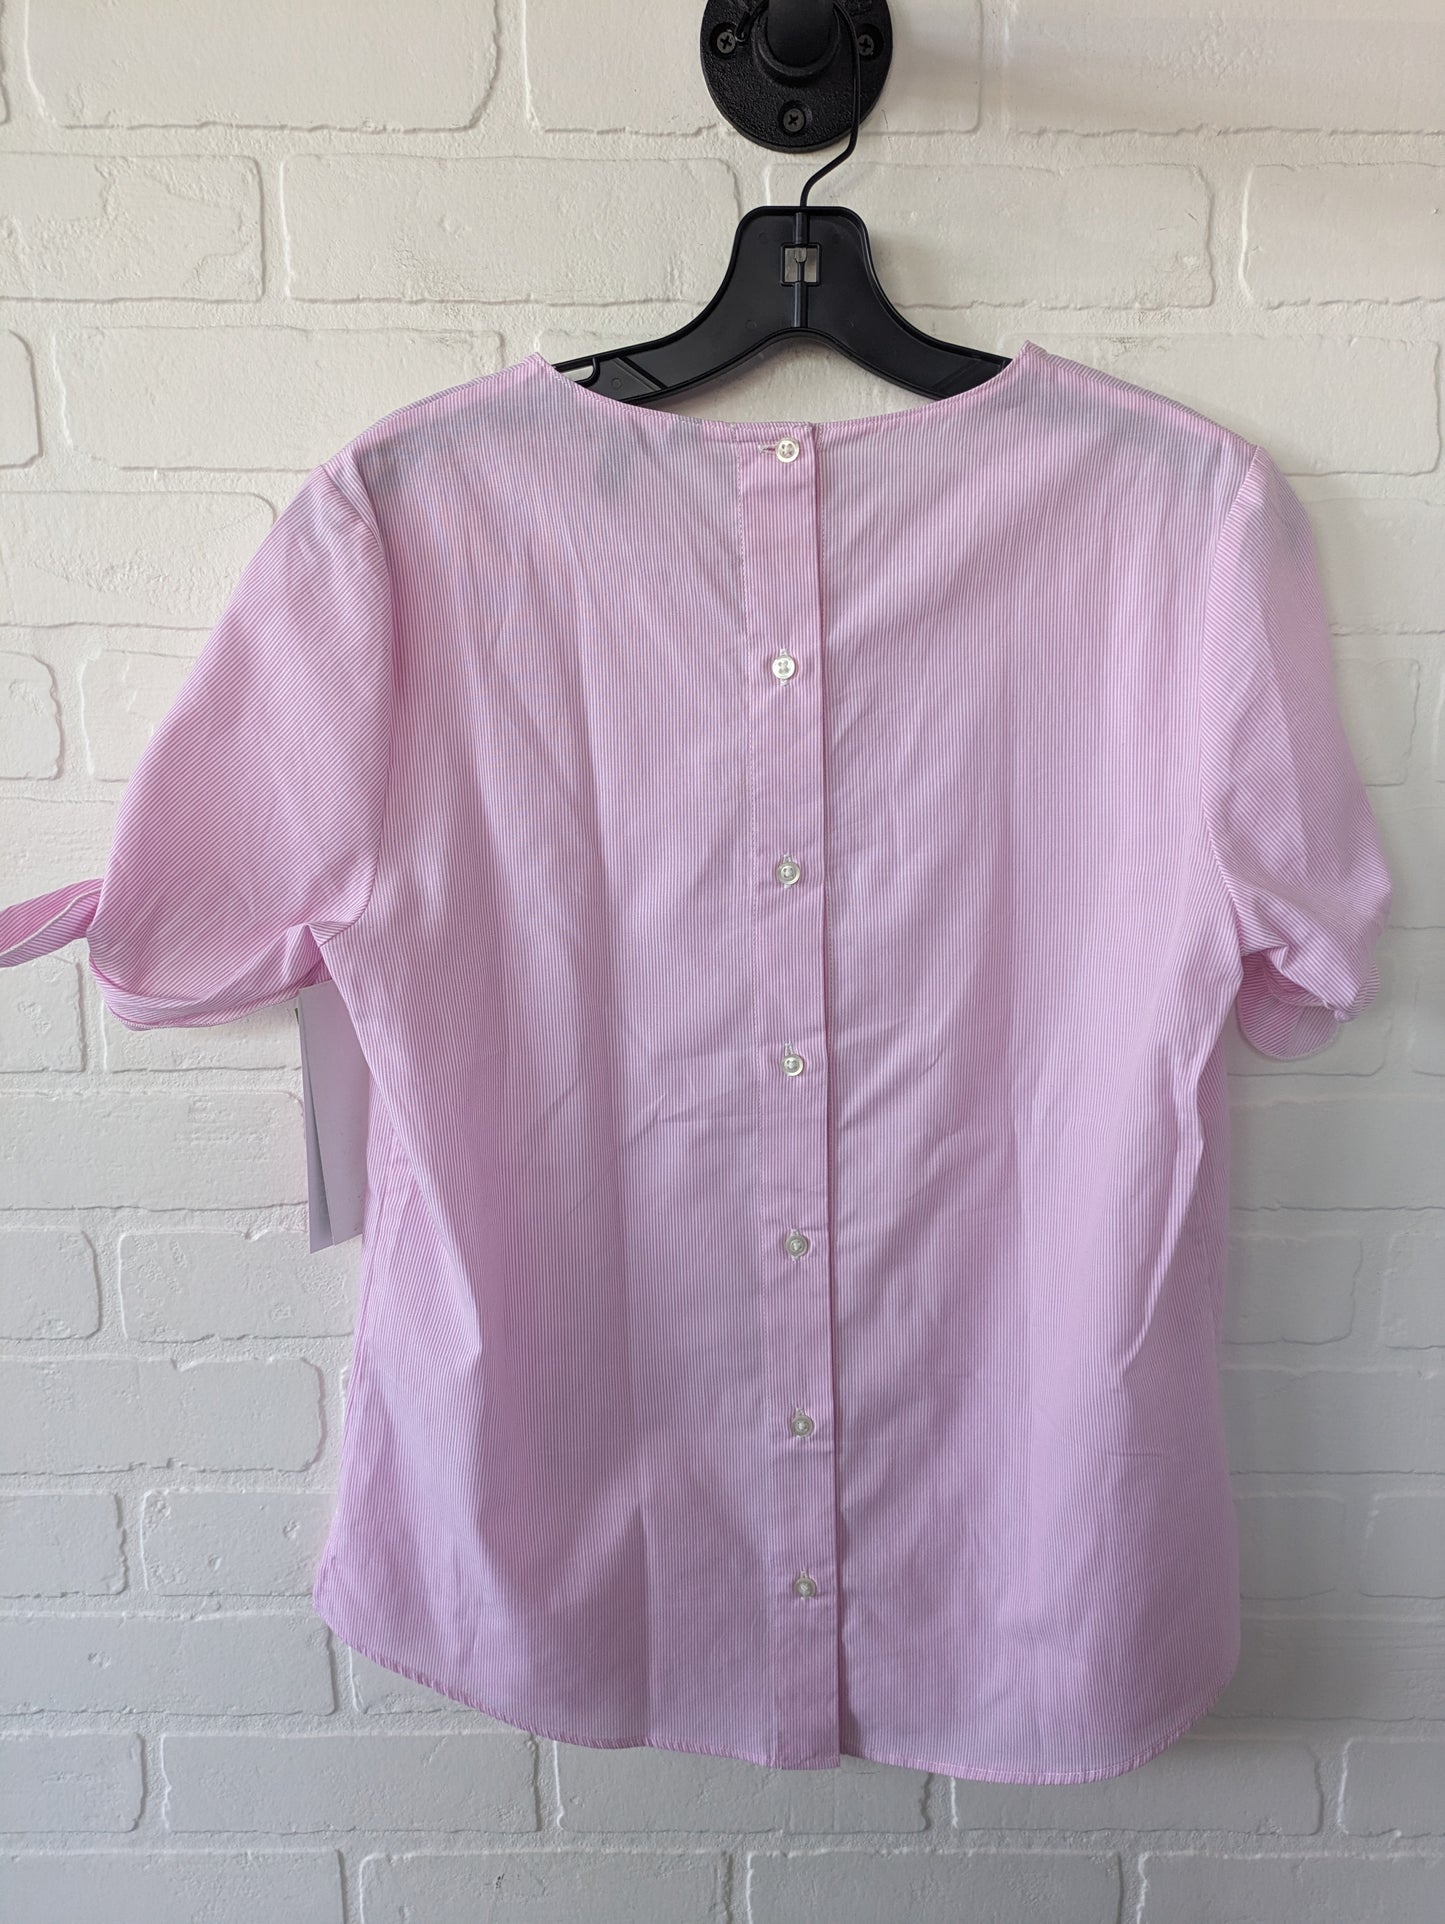 Top Short Sleeve By Banana Republic  Size: S